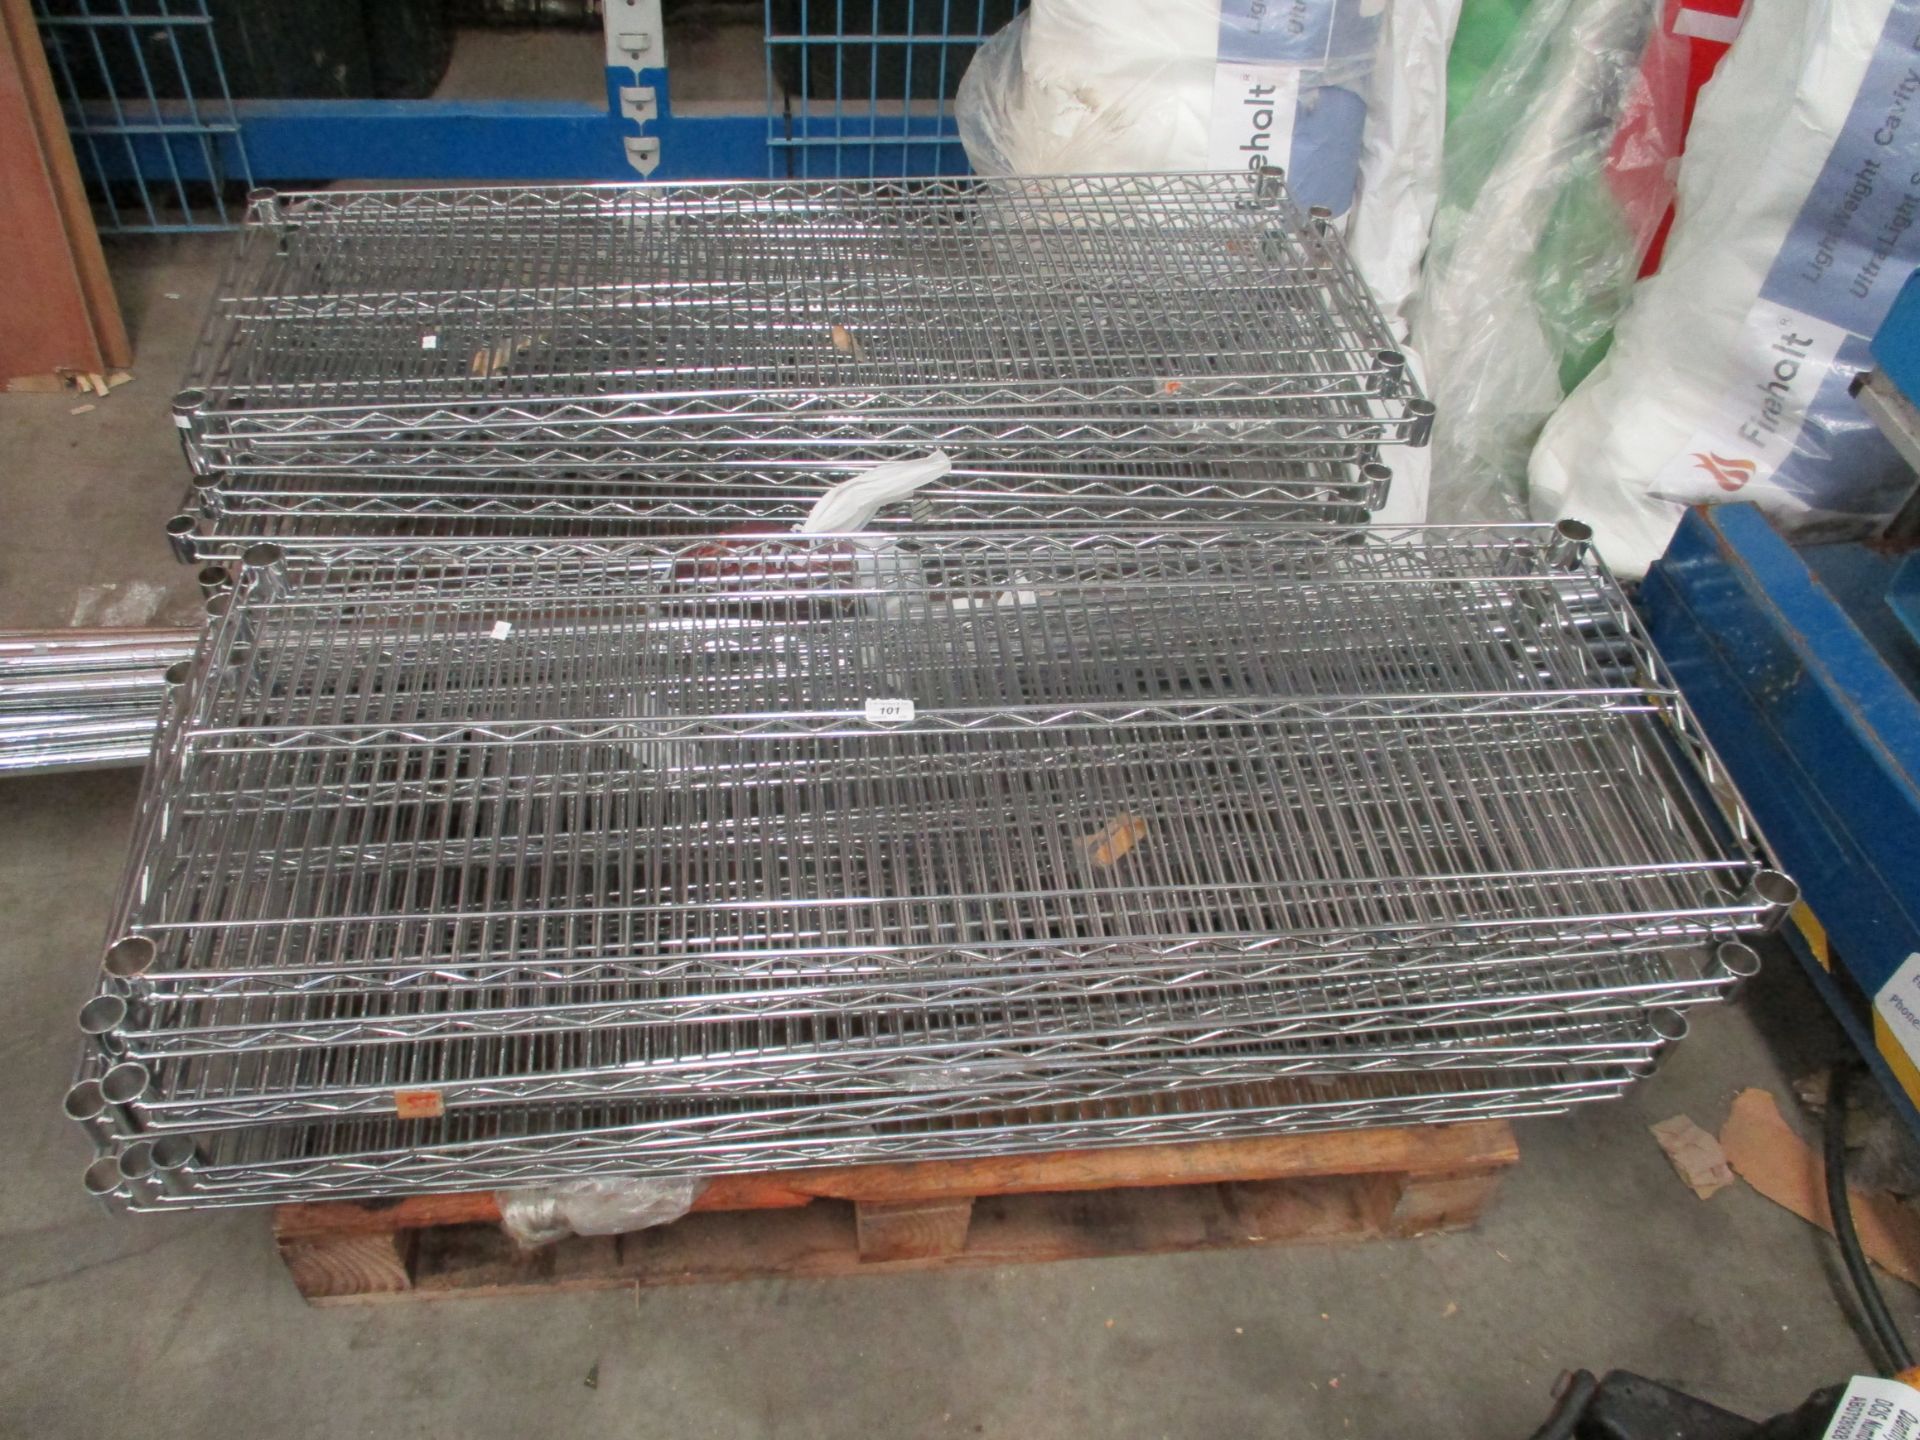 4 x chrome metal catering drying/storage racks - to build up - each 4 shelf and 120 x 45 x 180cm